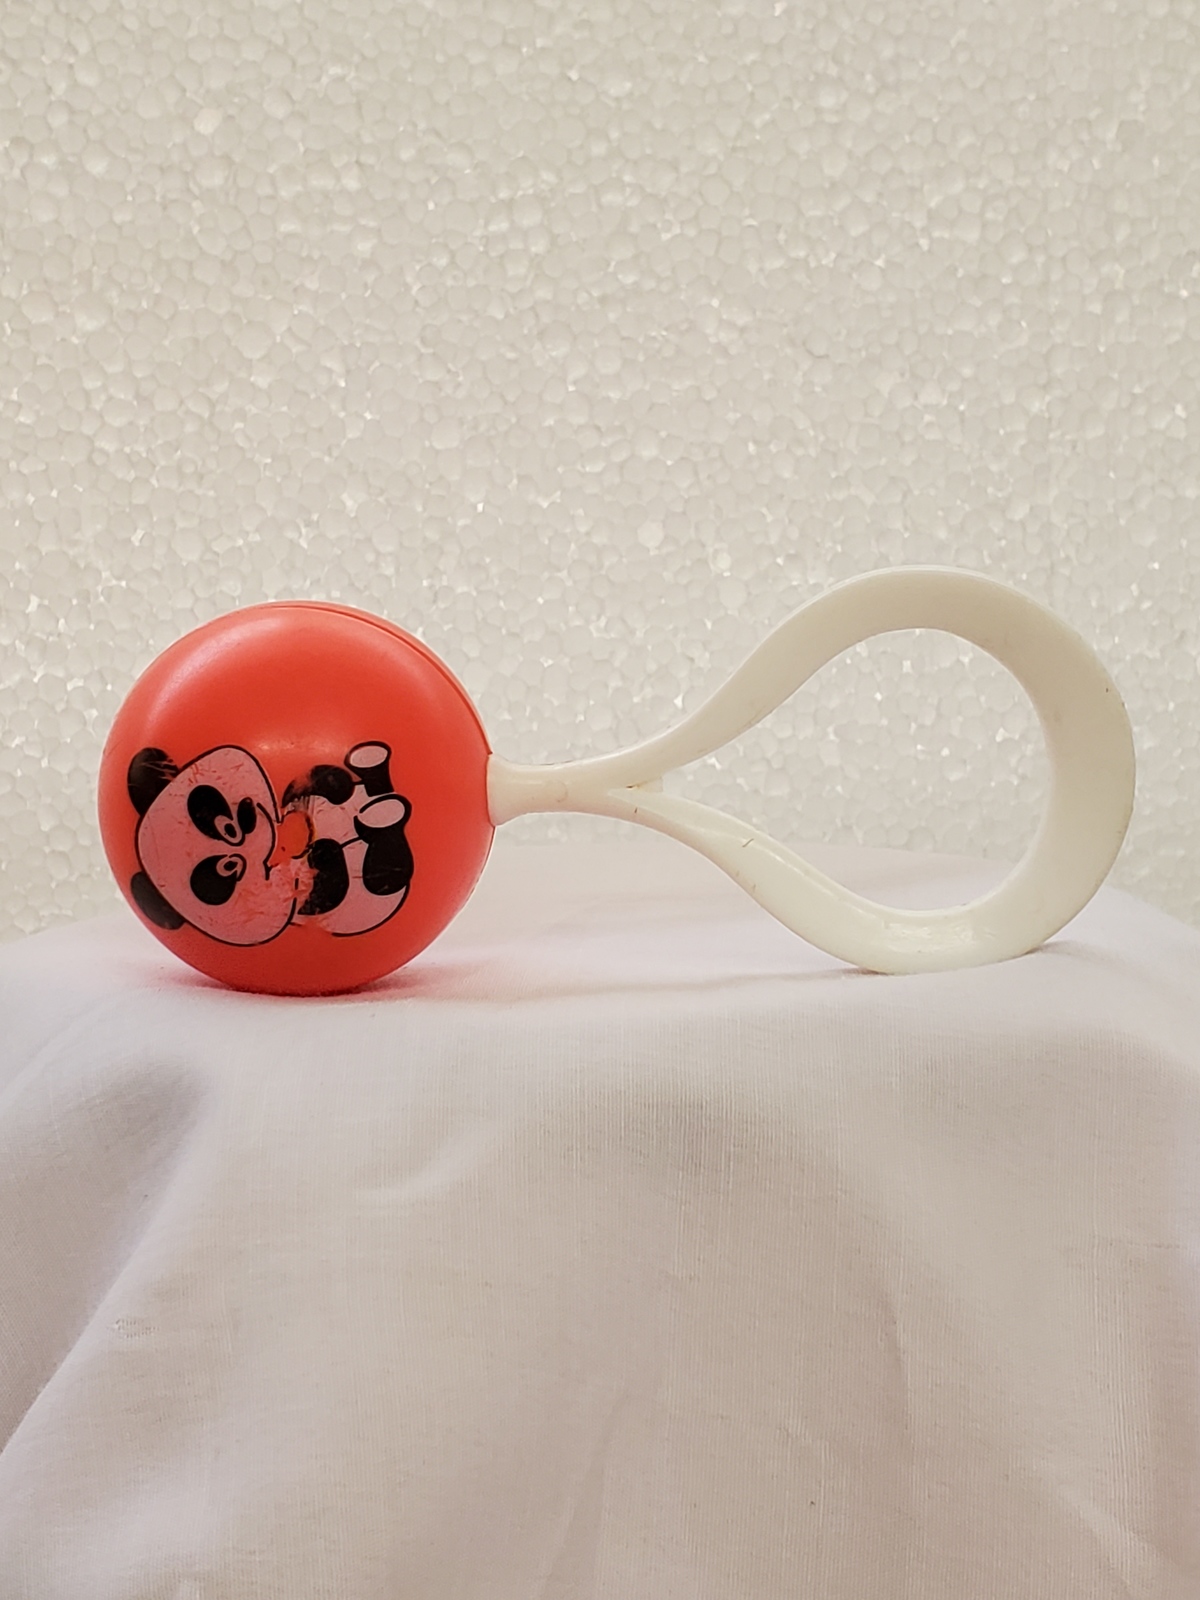 Vintage 'The First Years' baby hand rattle, 1977 - $14.99